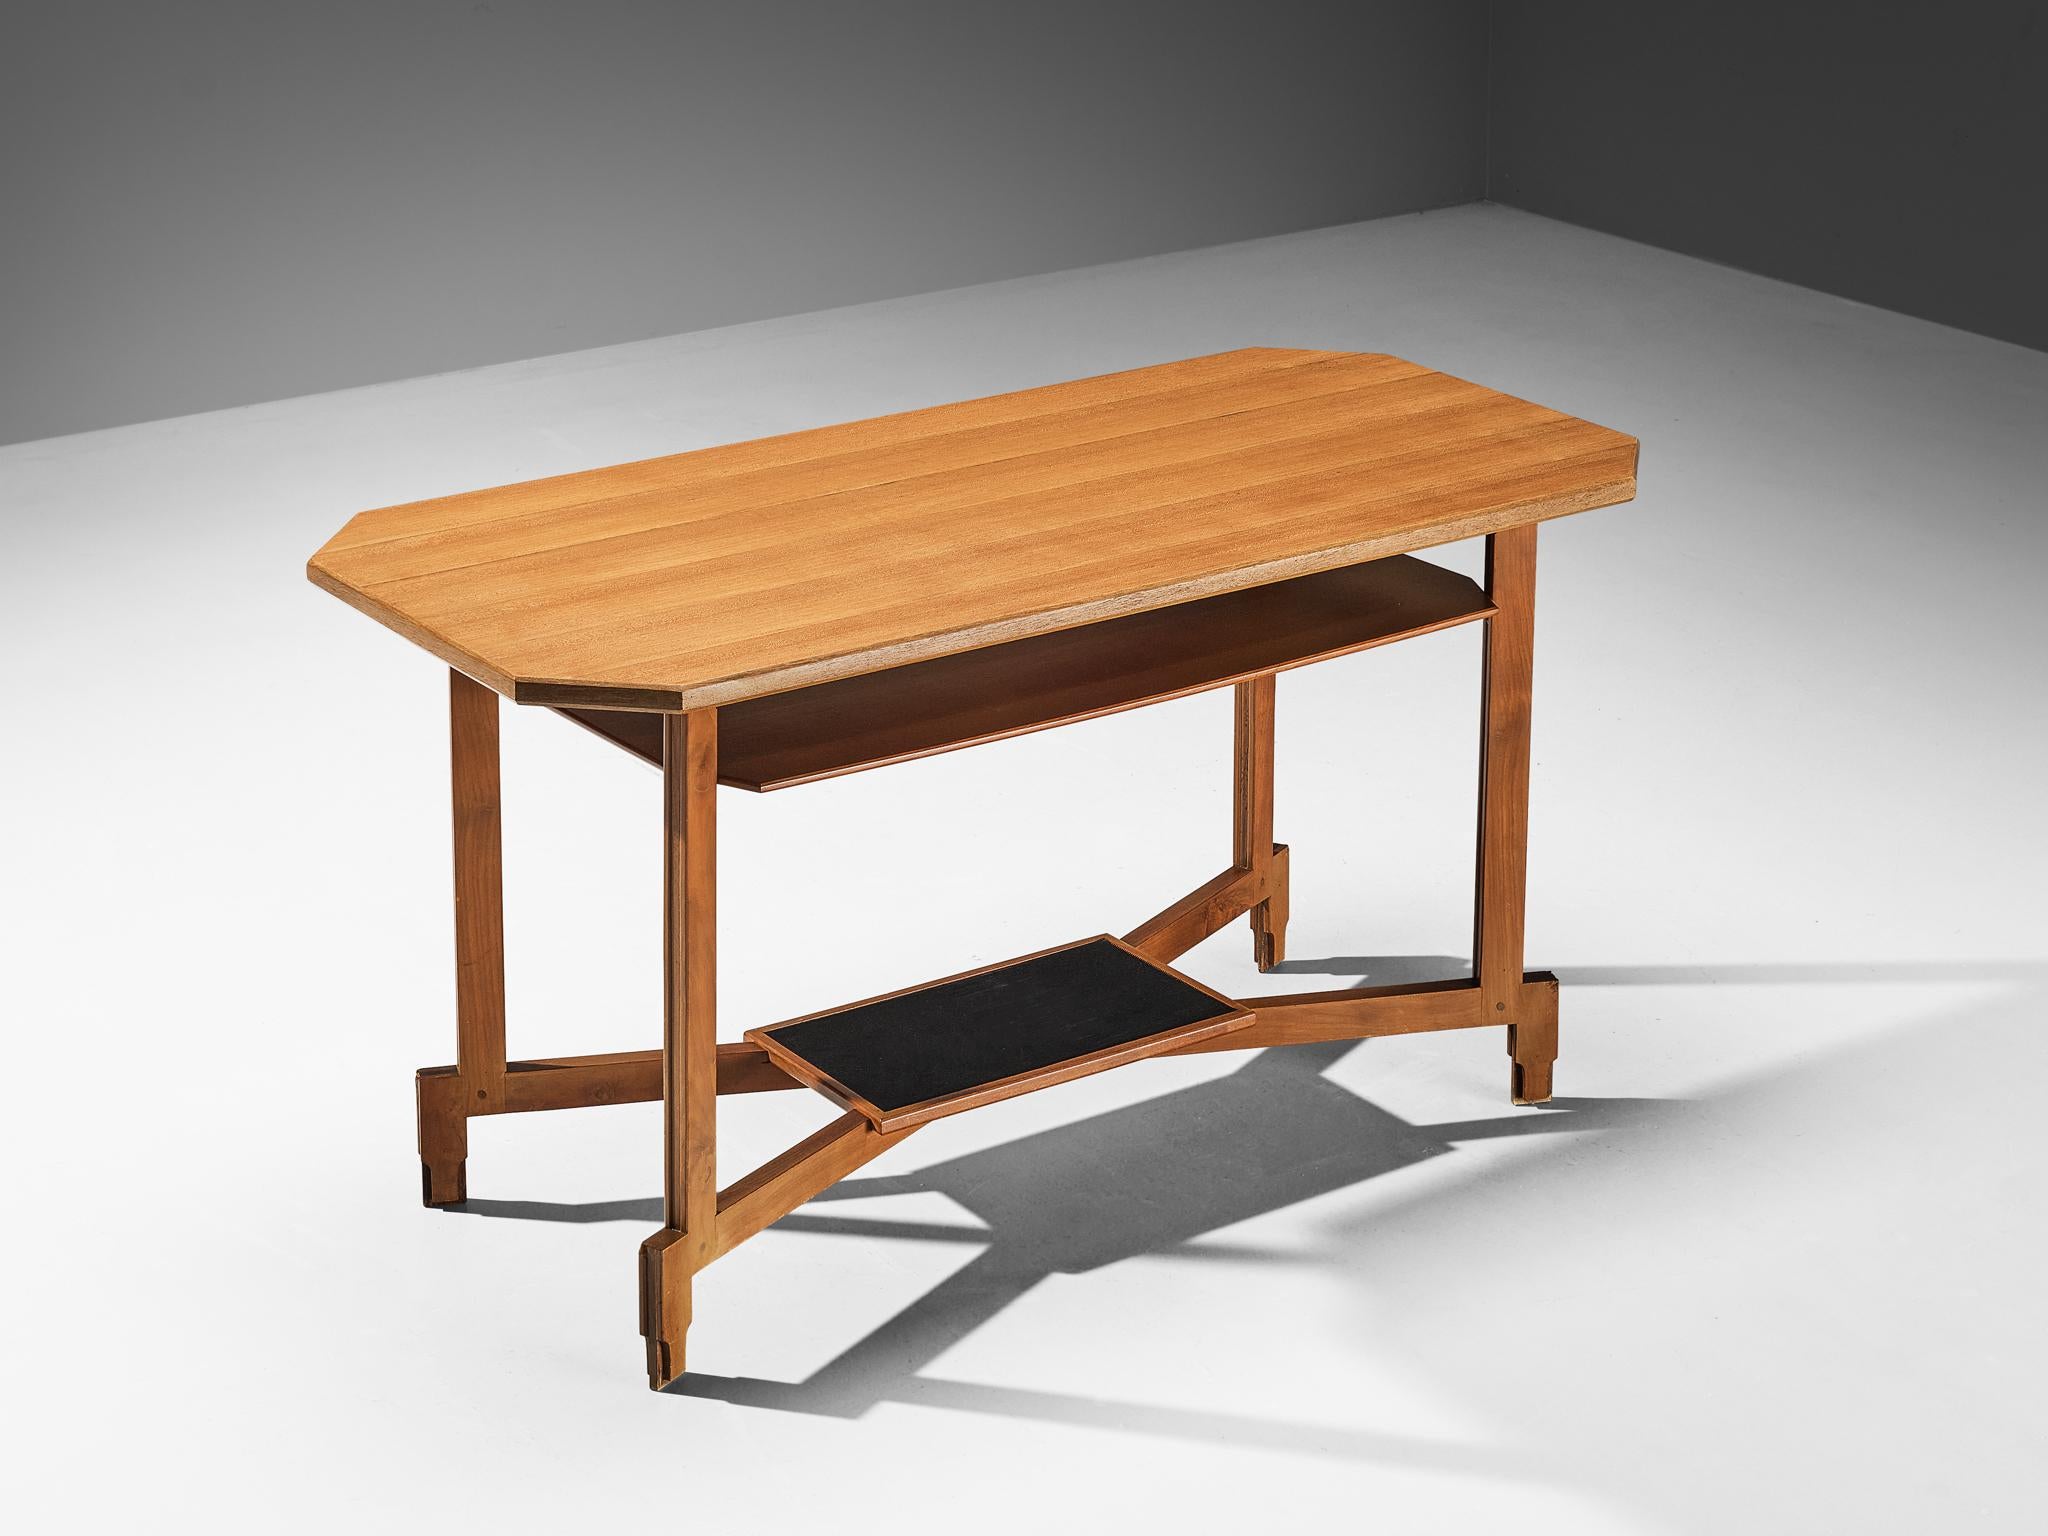 La Permanente Mobili Cantù, writing desk, cherry, yellow meranti, plastic, fabric, Italy, 1960s

This writing table is produced by La Permanente Mobili Cantu in the sixties and employs the Italian aesthetic vocabulary and typical woodwork. The